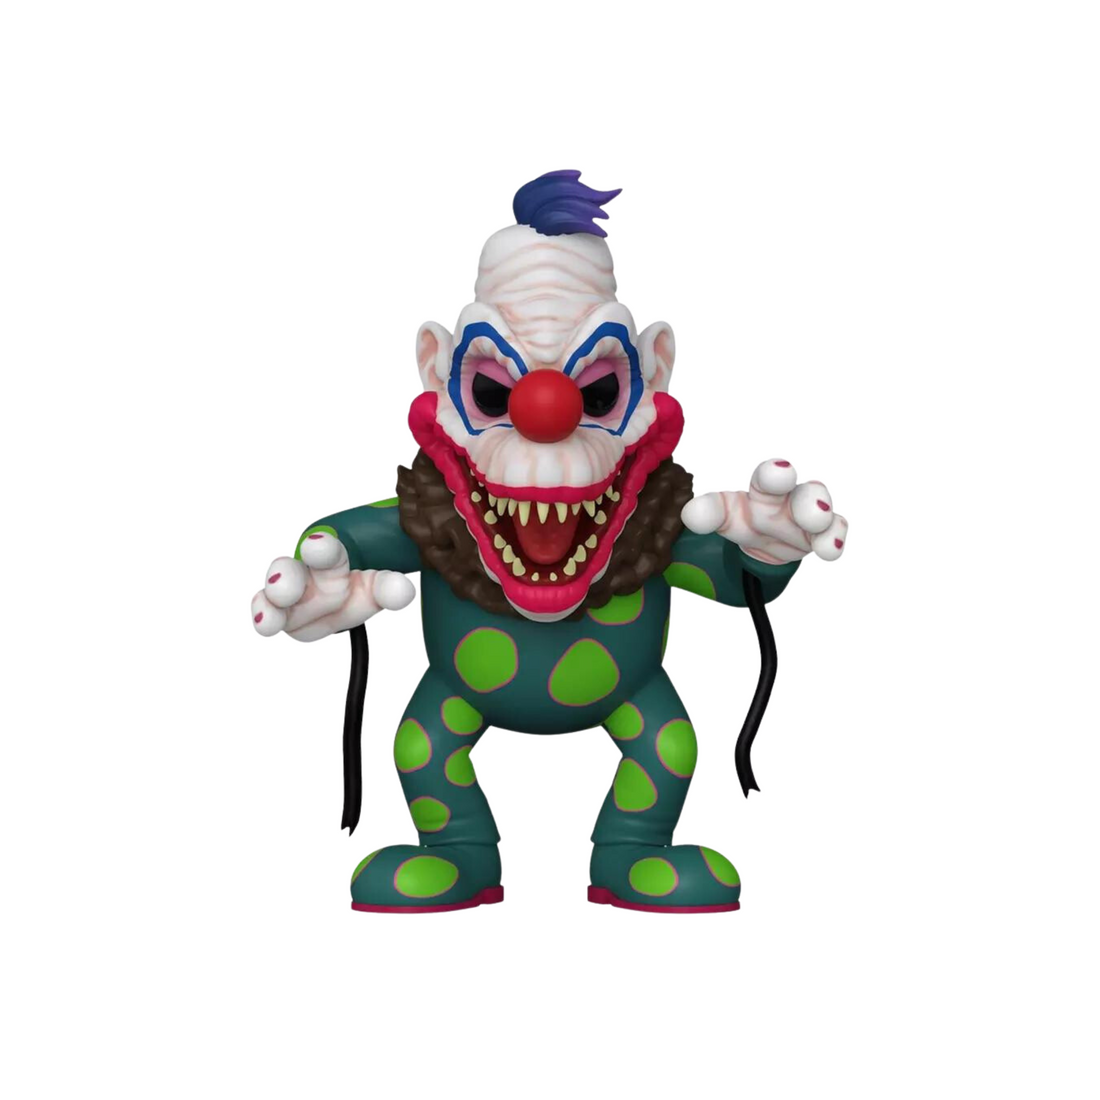 Killer Klowns from Outer Space 